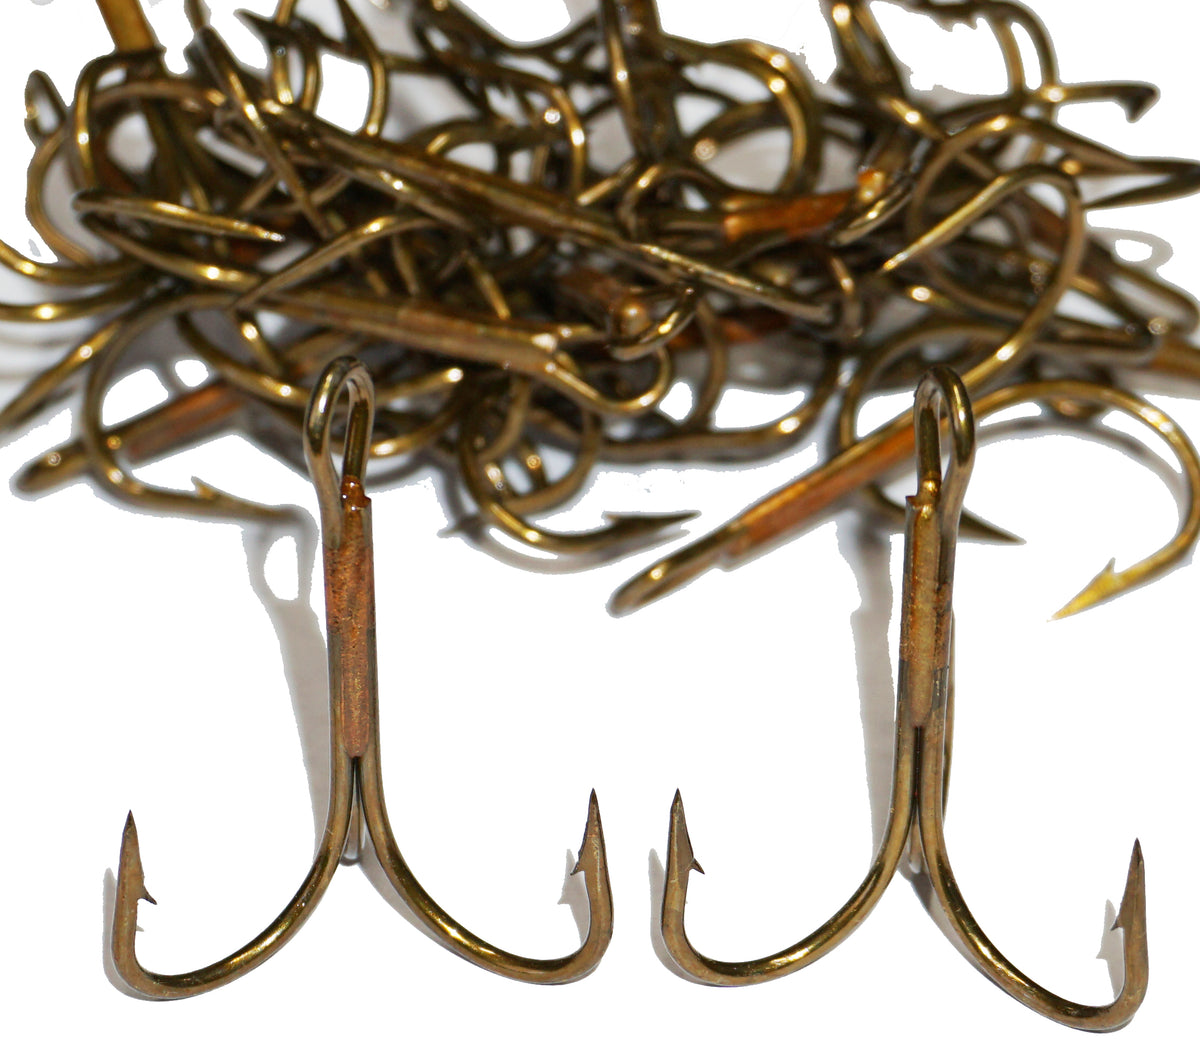 Mustad 3551 Classic Treble Standard Strength Fishing Hooks | Tackle for  Fishing Equipment | Comes in Bronz, Nickle, Gold, Blonde Red, Hooks 